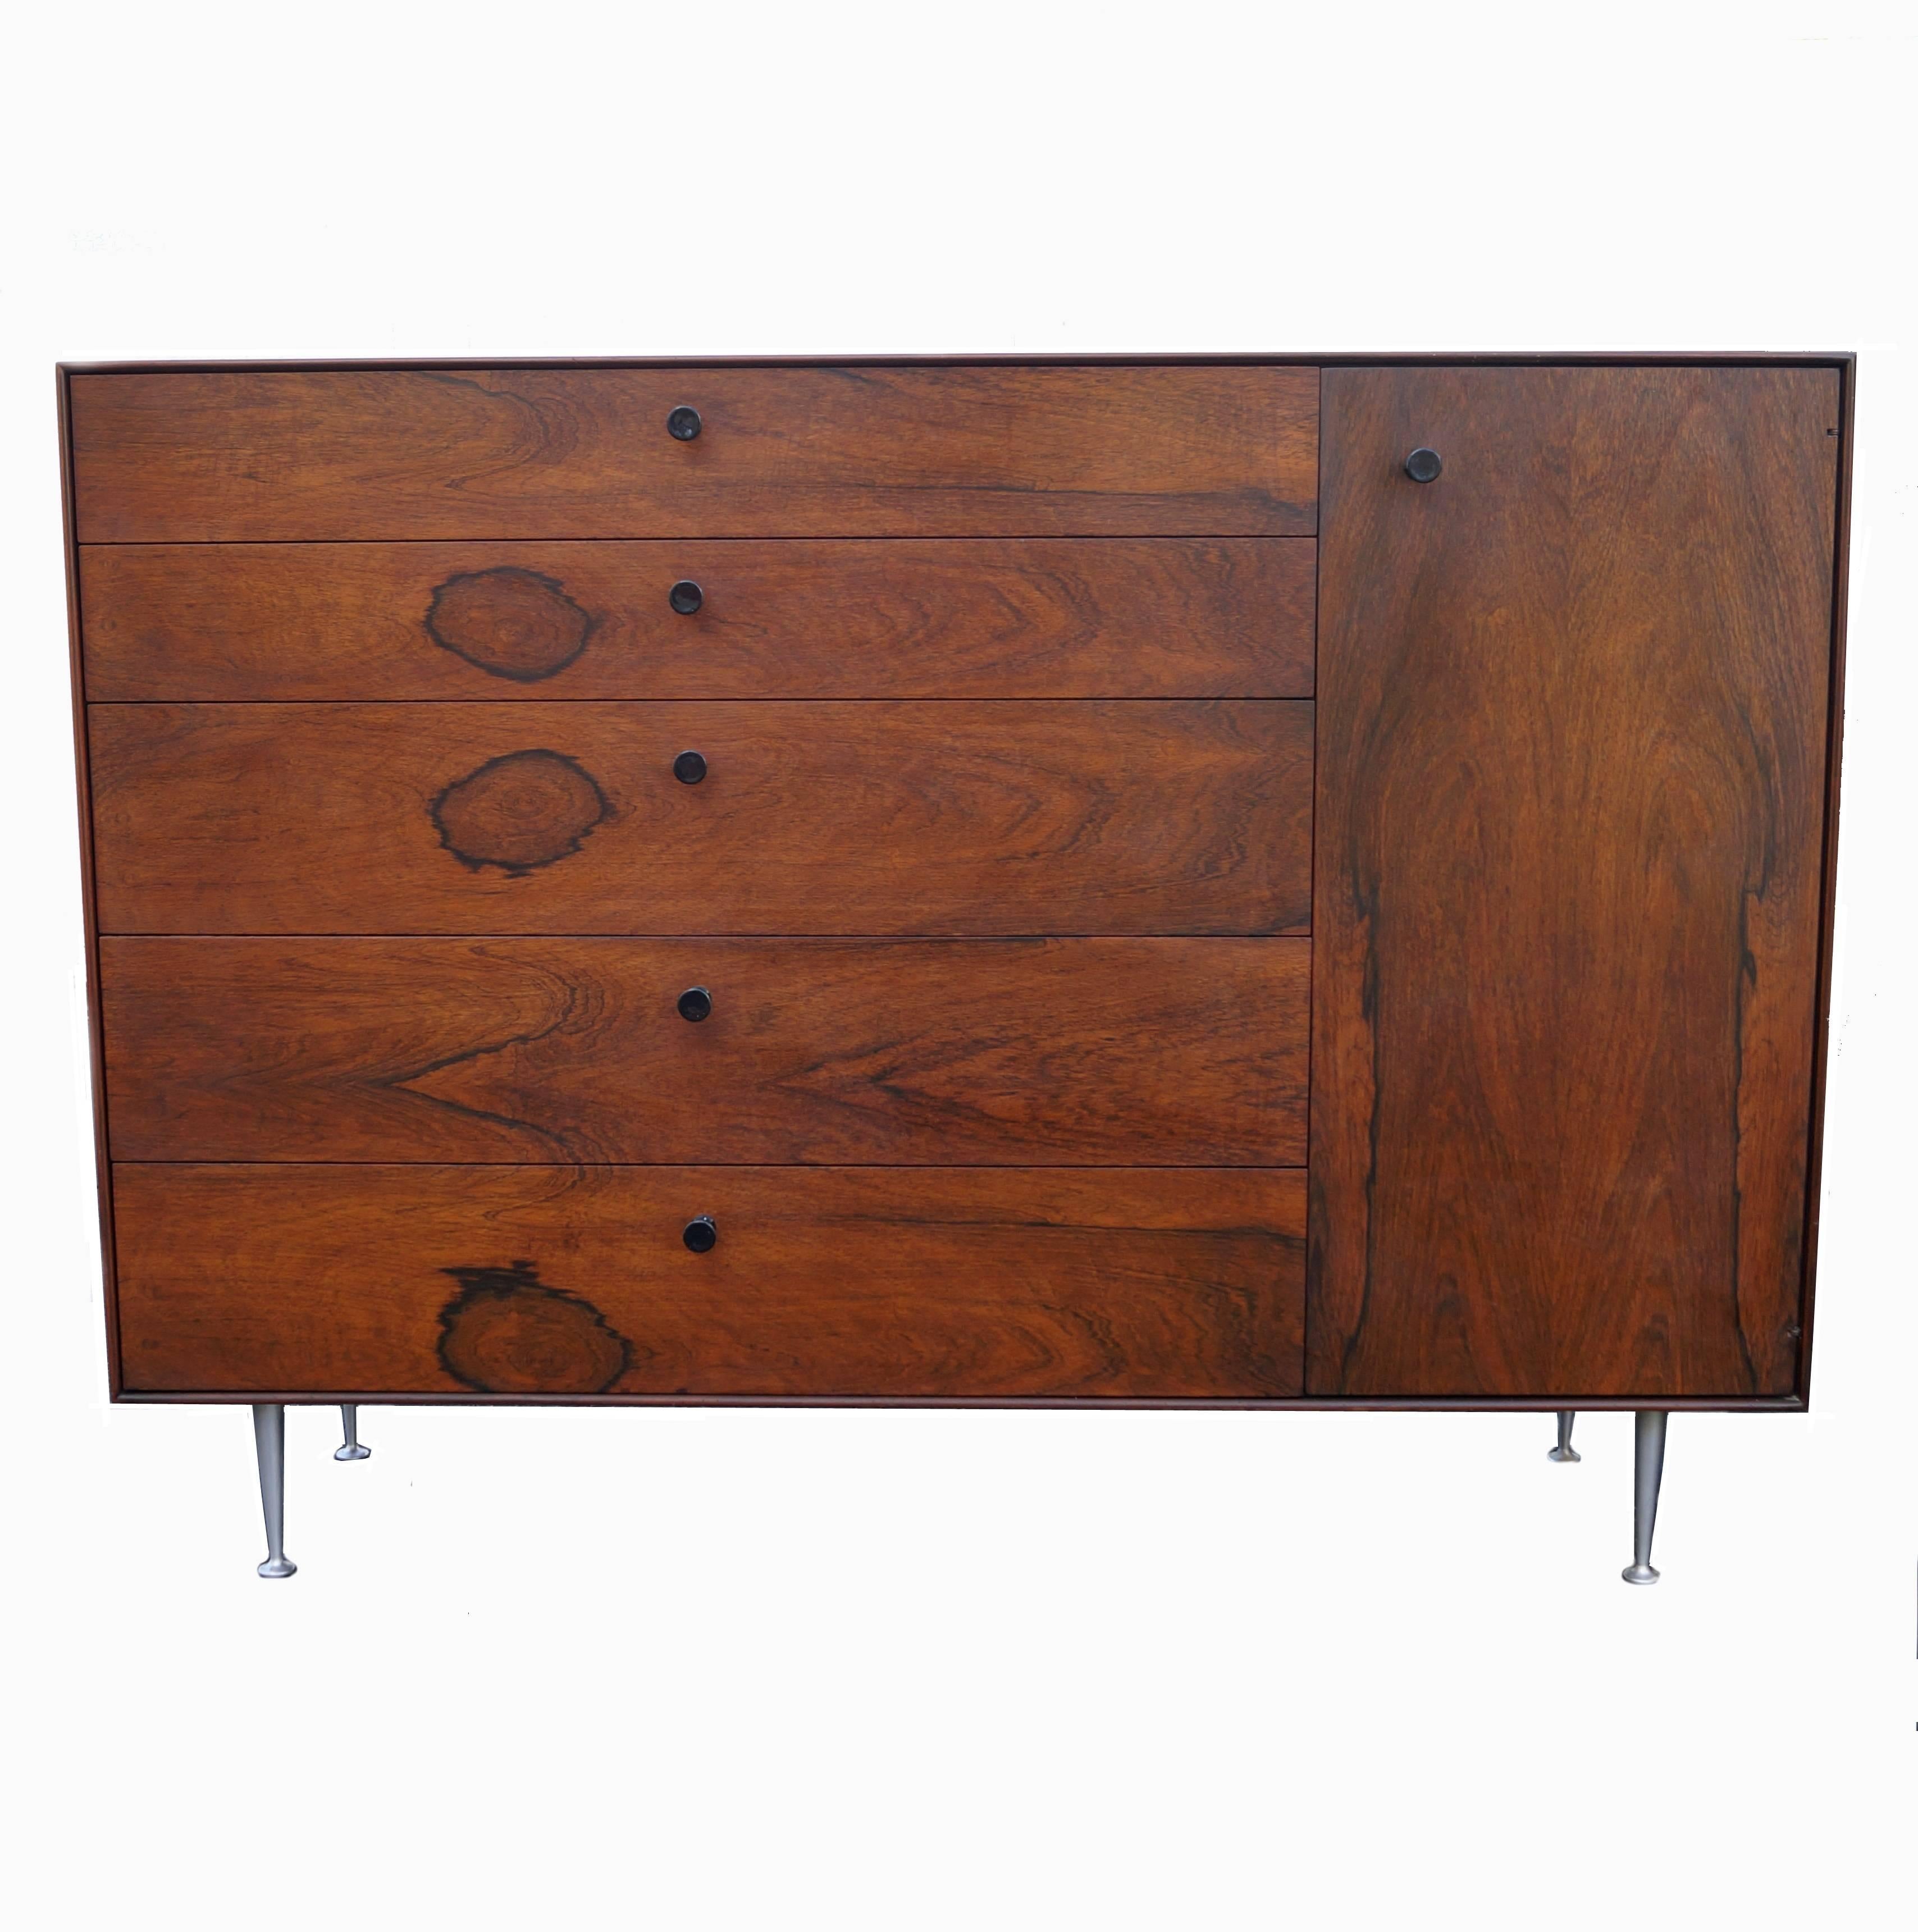 George Nelson for Herman Miller thin edge chest cabinet.